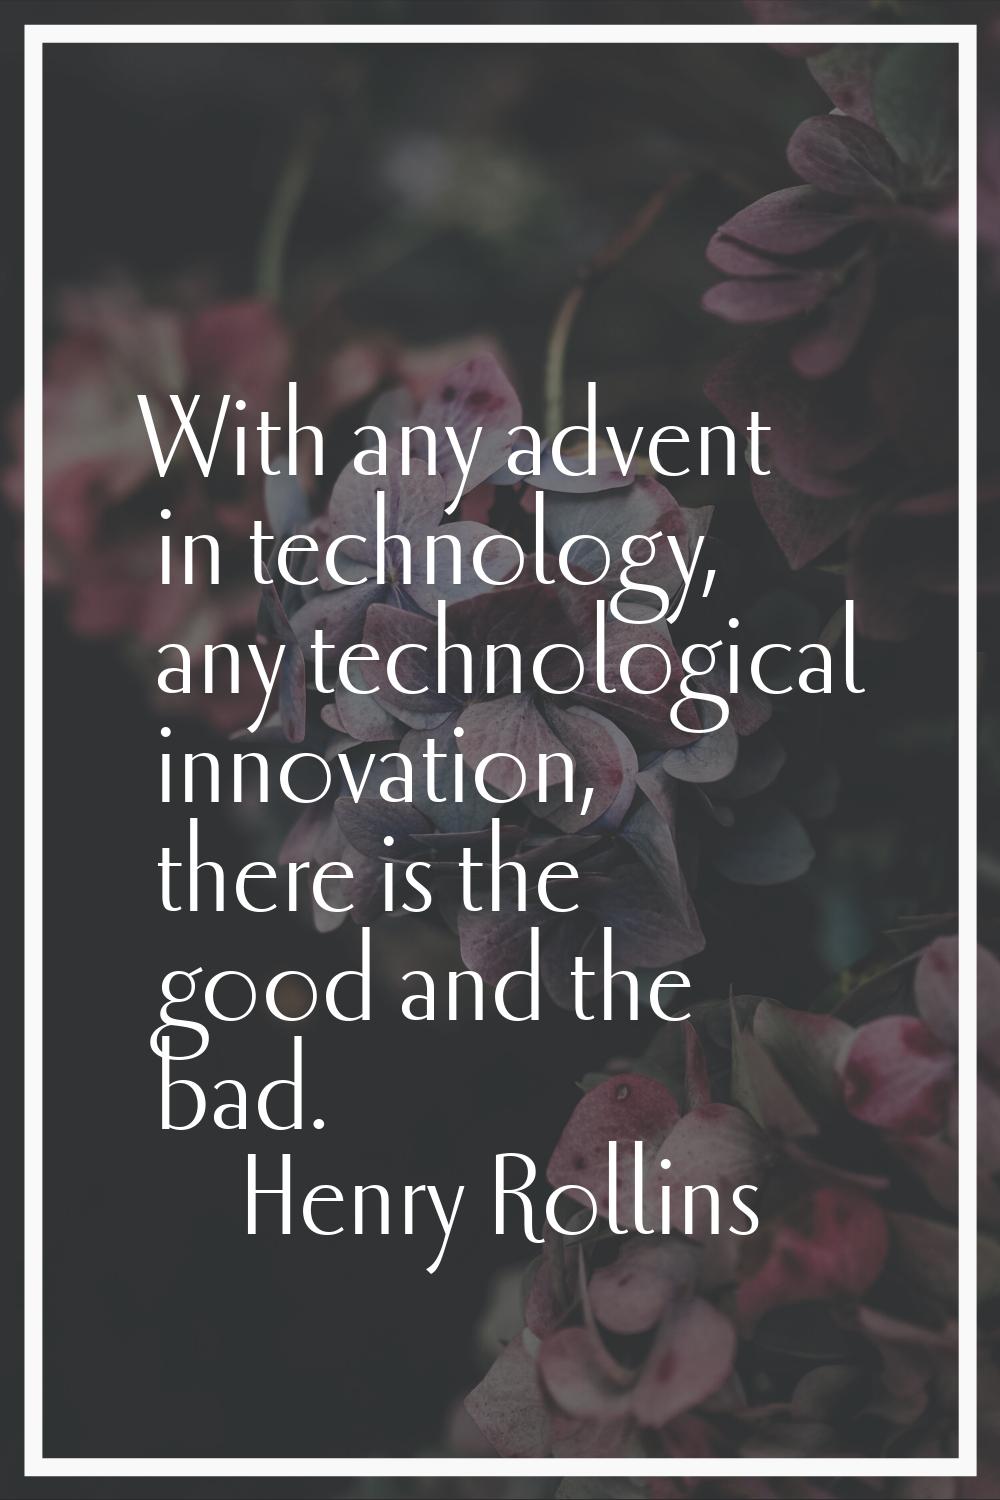 With any advent in technology, any technological innovation, there is the good and the bad.